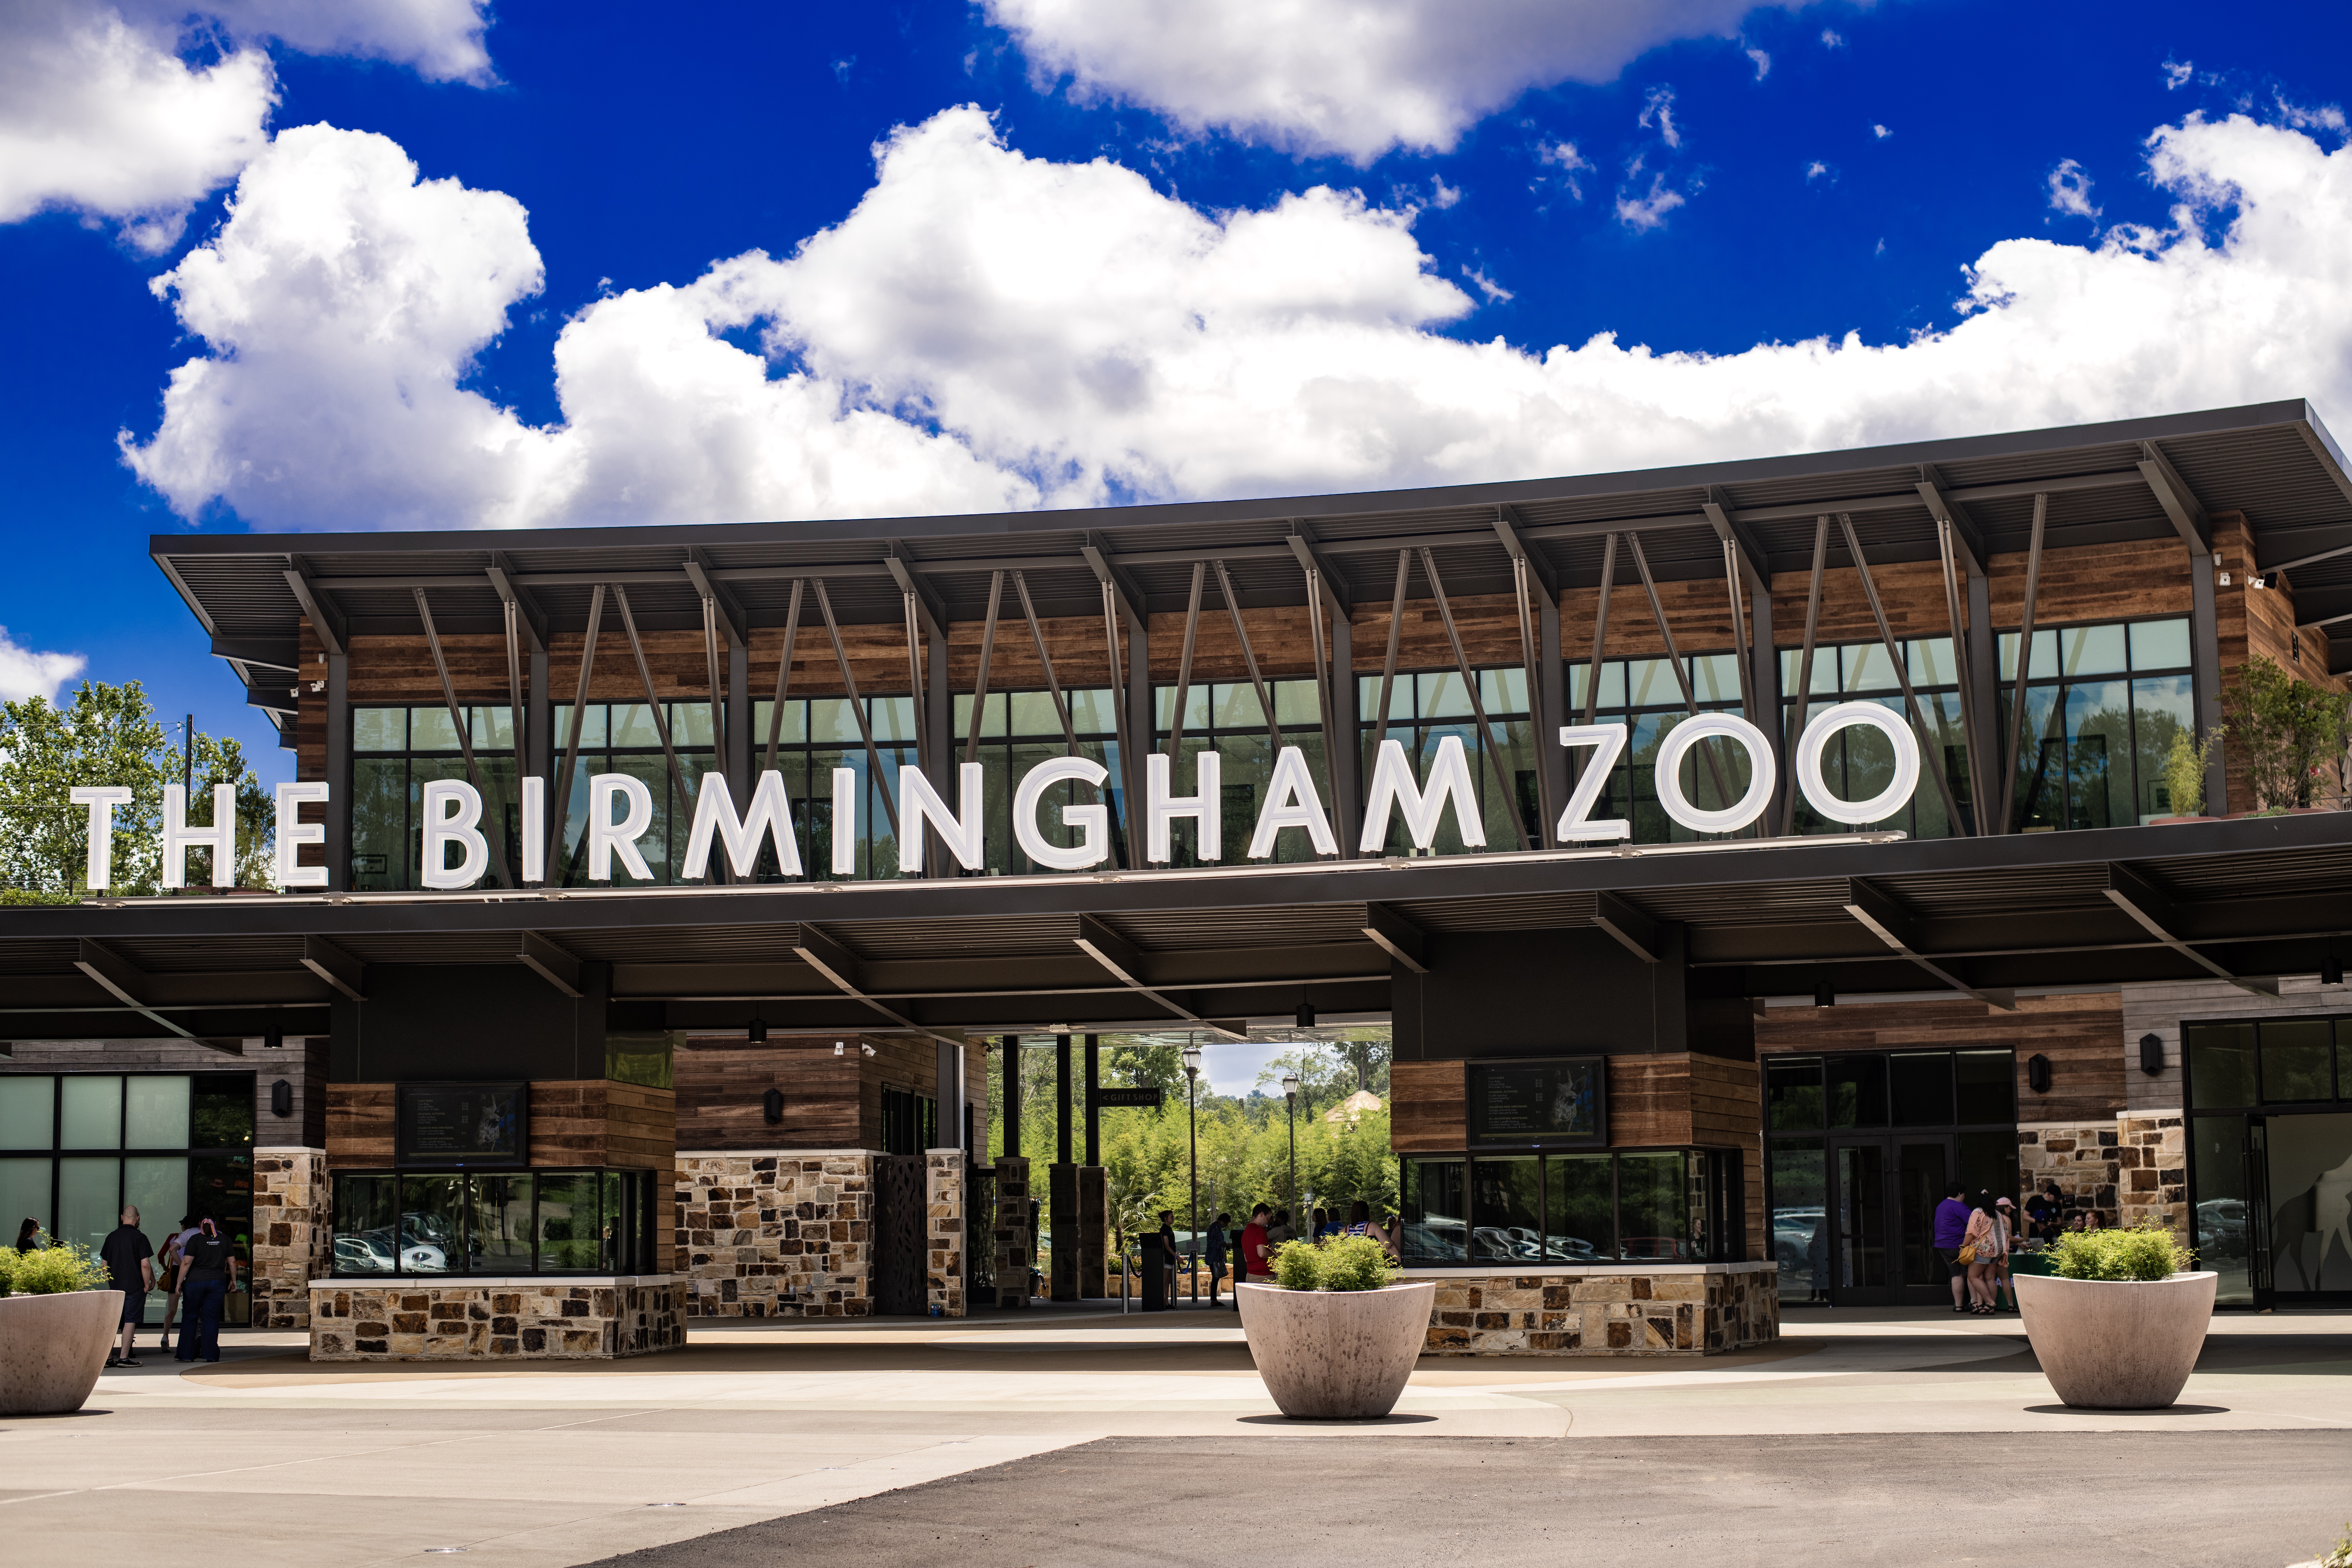 Grand Entrance for The Birmingham Zoo | The Birmingham Times